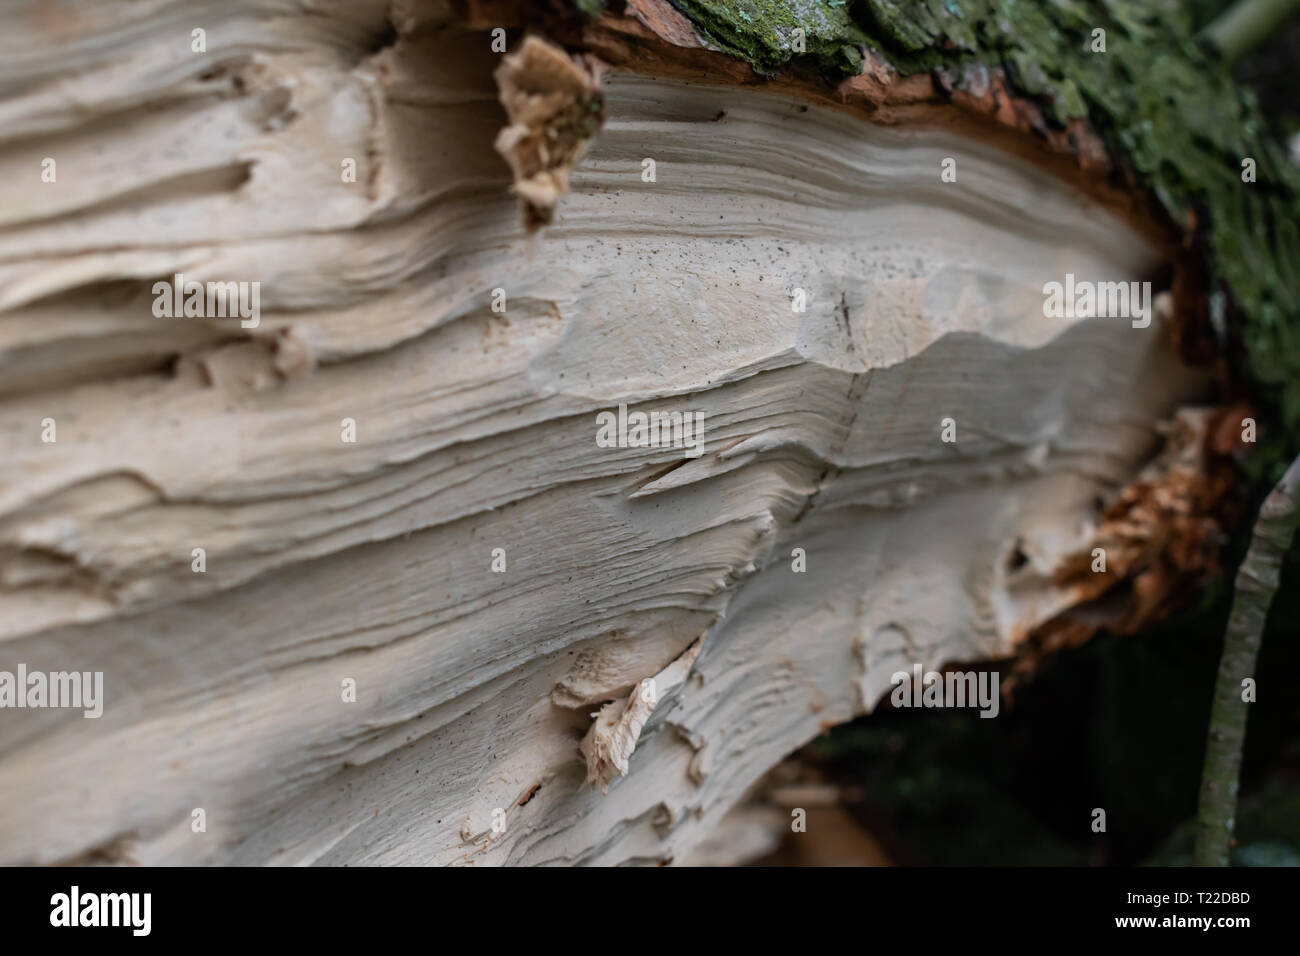 Close-up view of clear cut fallen tree. Sharp lines of inner and outter wood. Stock Photo